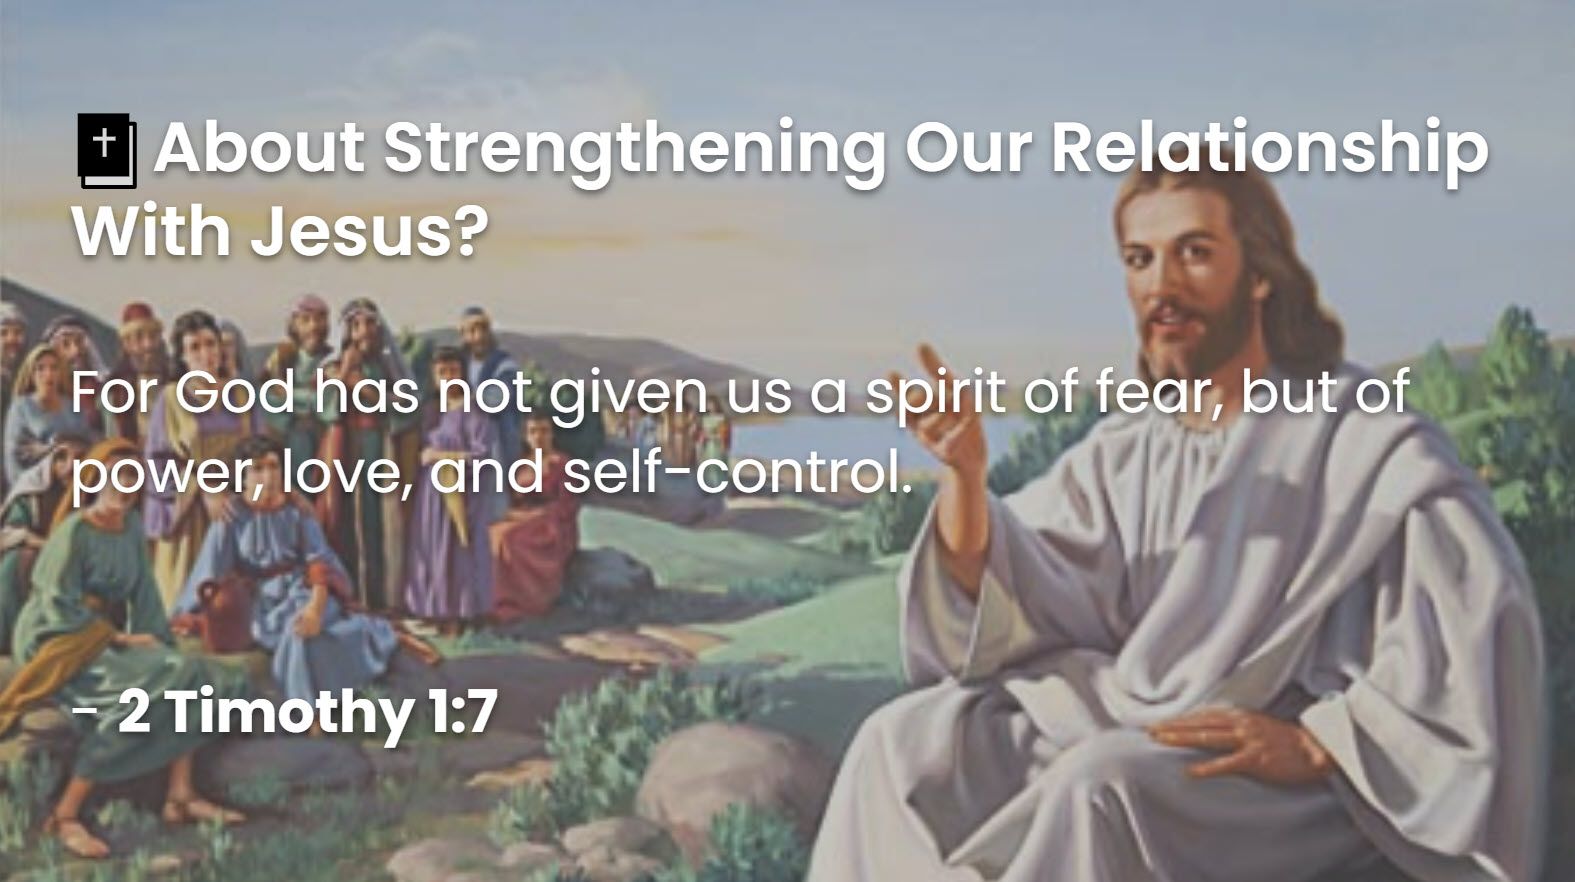 What Does The Bible Say About Strengthening Our Relationship With Jesus